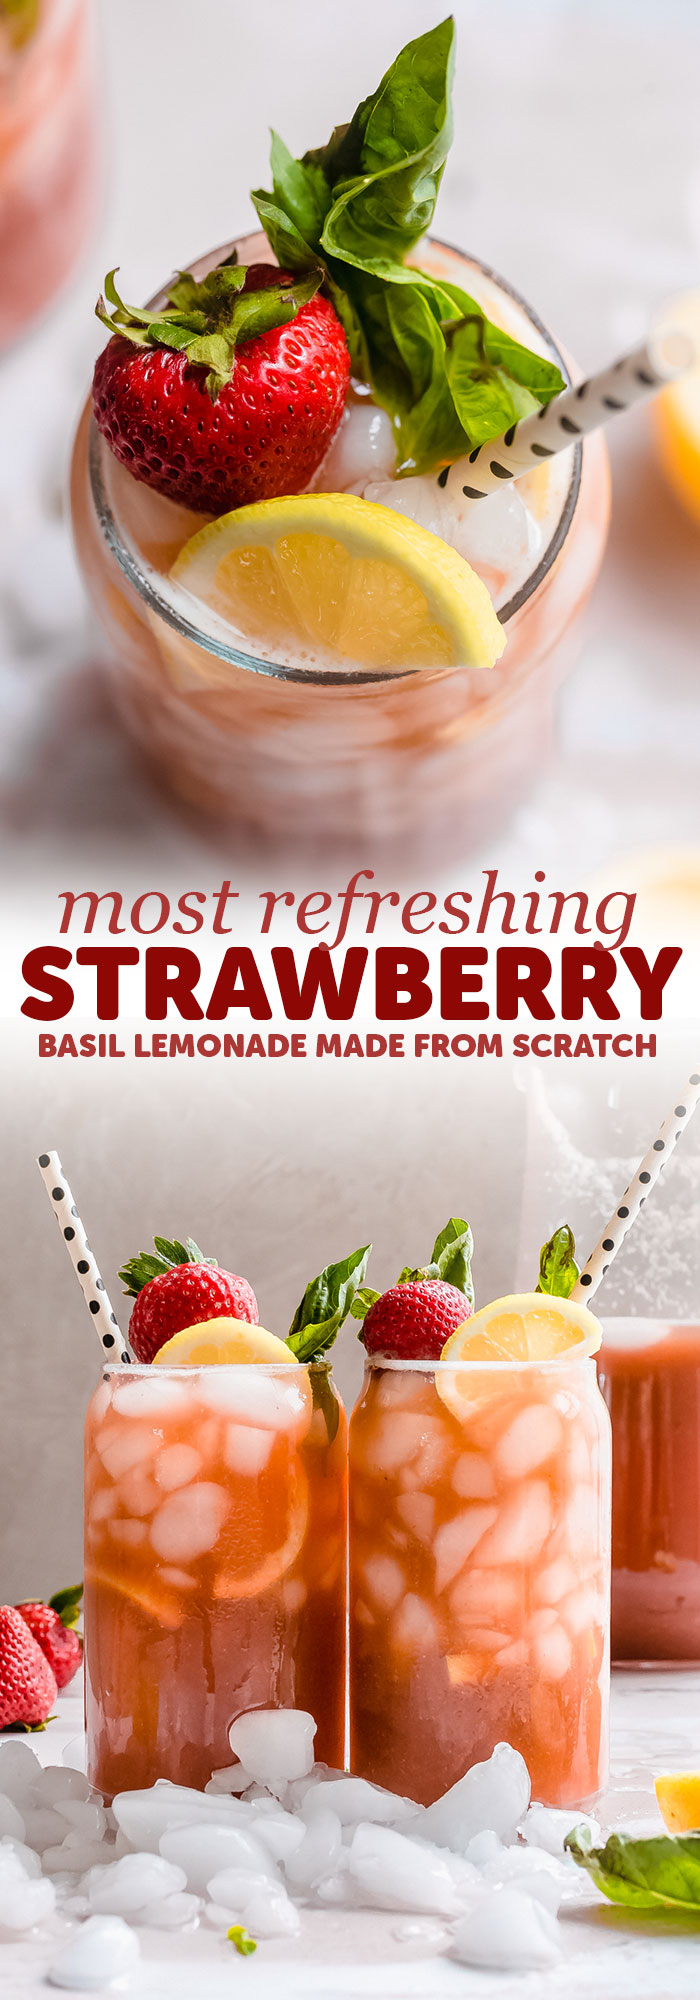 Refreshing Strawberry Basil Lemonade - Learn how to make a pitcher full of sunshine! Strawberry lemonade made from scratch with tons of basil! #lemonade #homemadelemonade #strawberrybasillemonade #strawberrylemonade | Littlespicejar.com